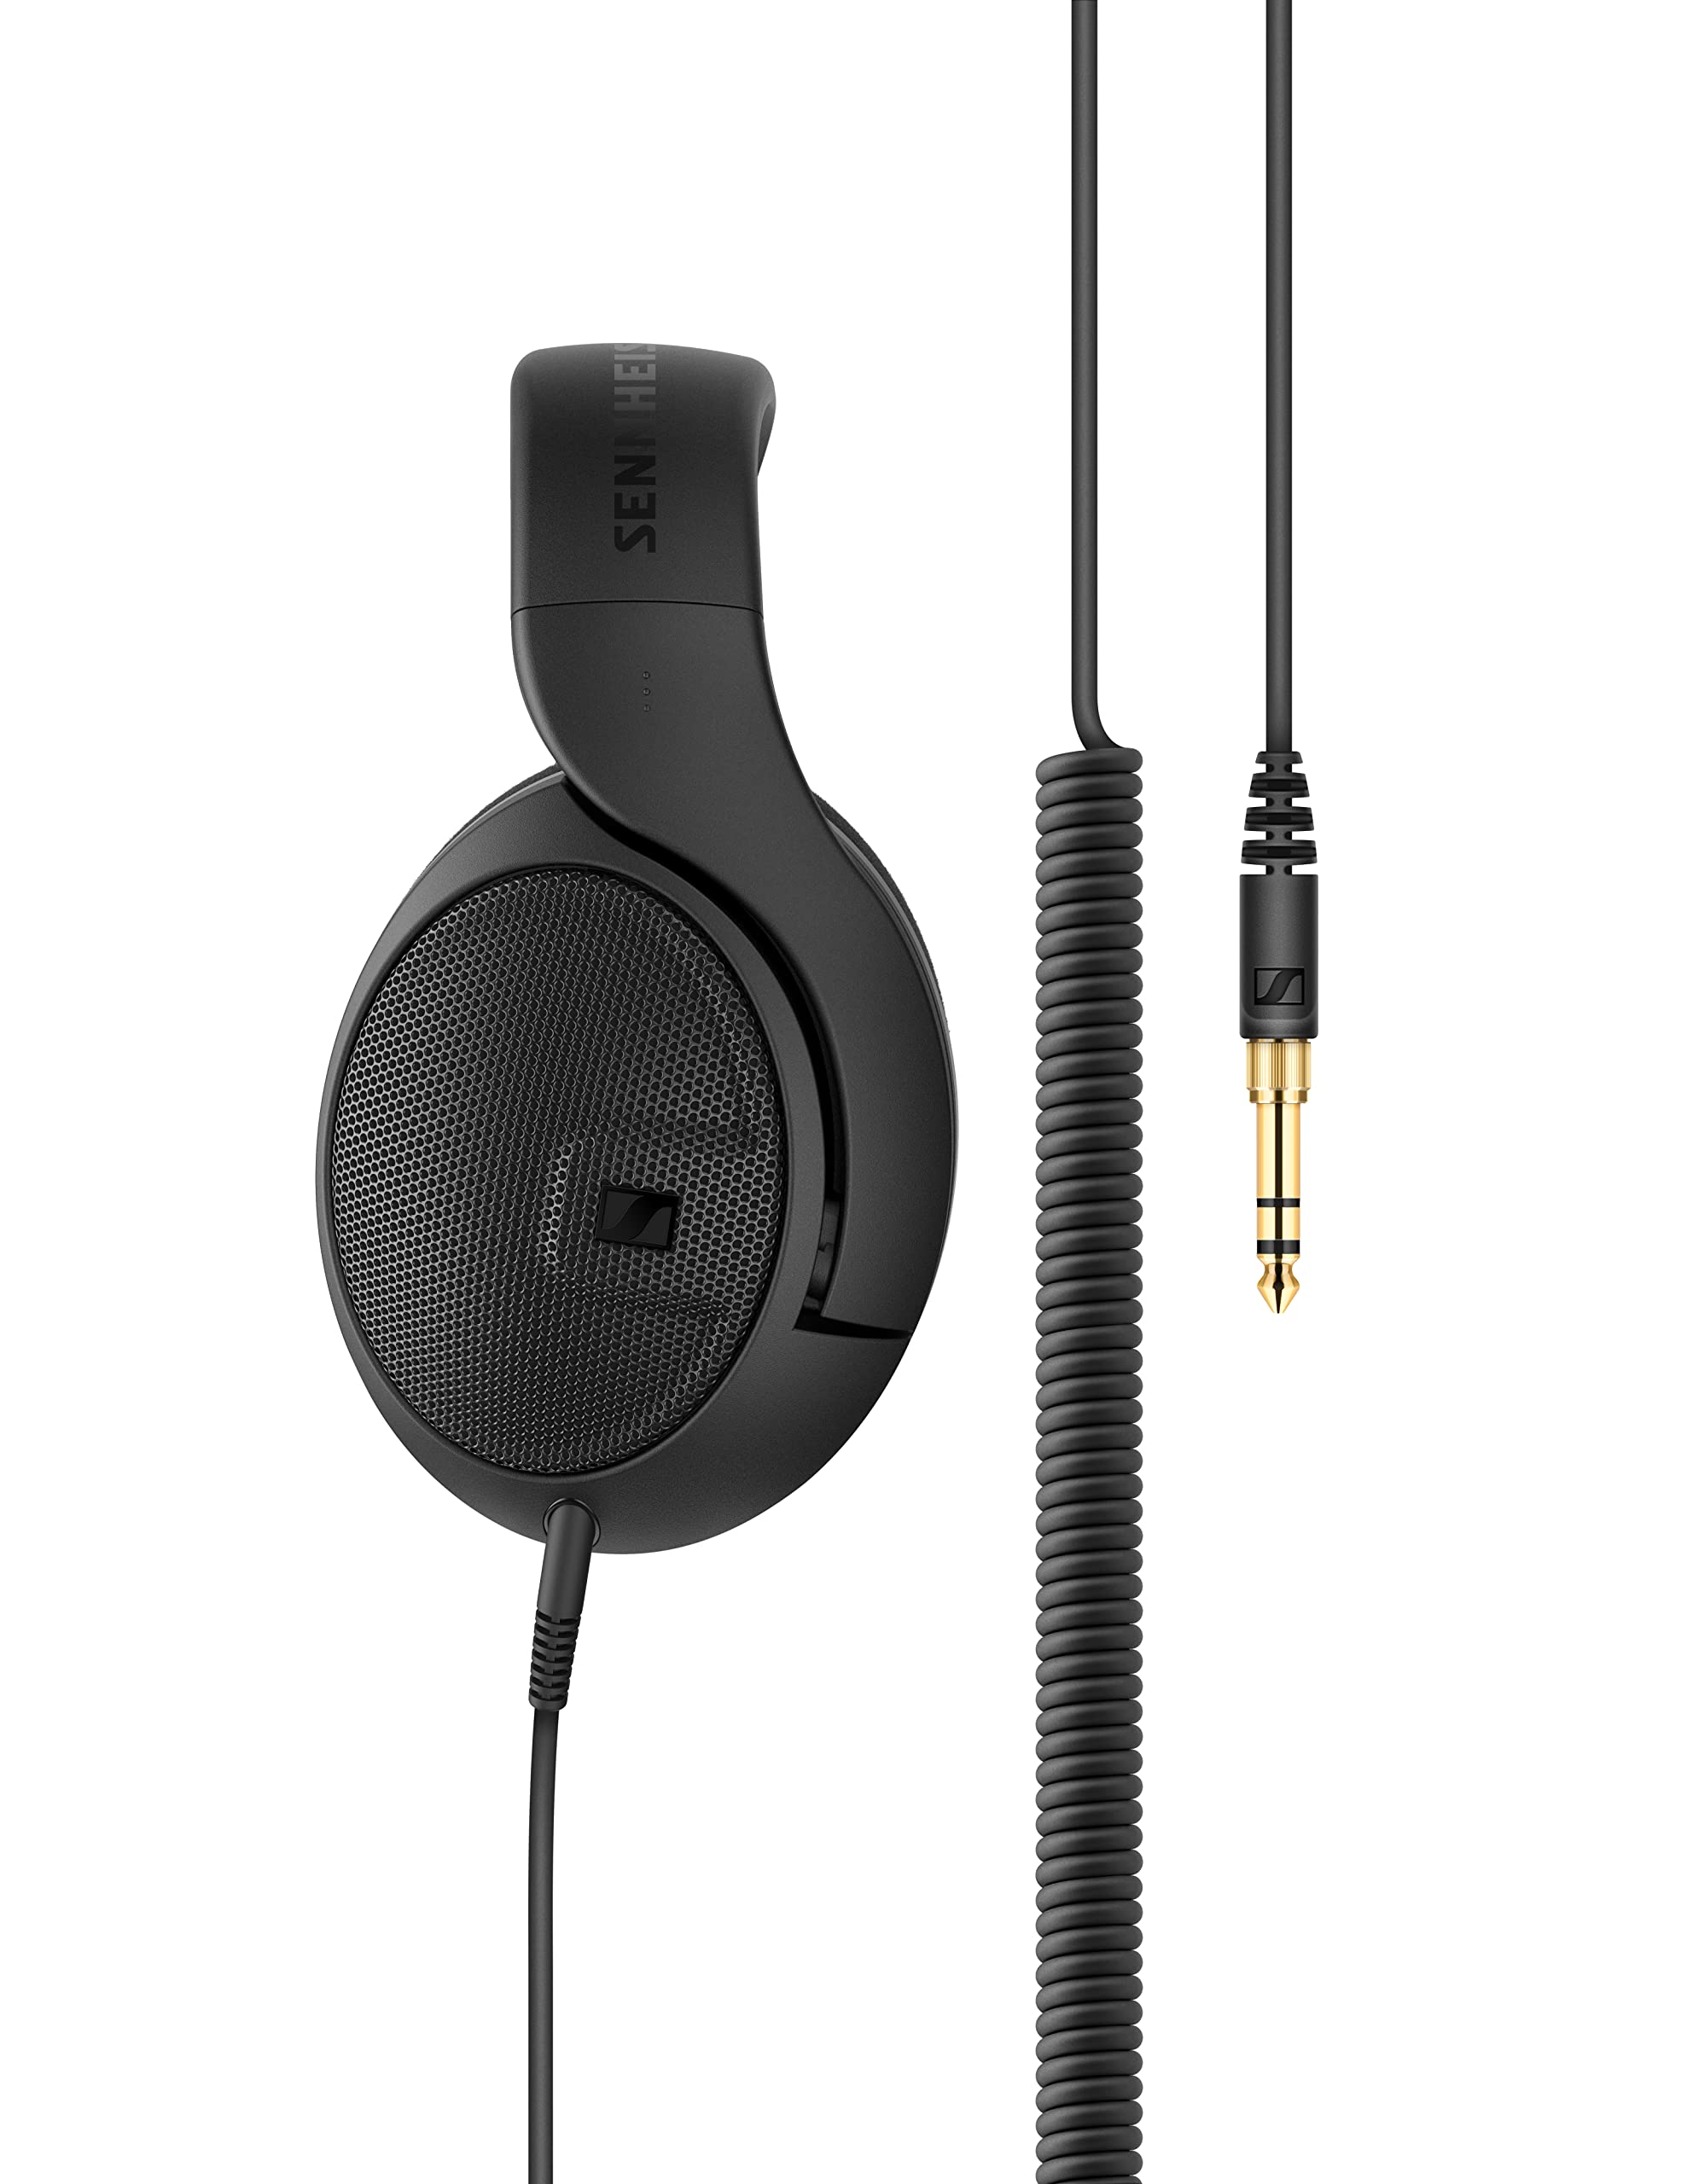 Sennheiser Pro Audio HD 400 PRO Open Back Dynamic Headphones for Studio, Mixing, Video, Audio Production, Twitch, High Definition music listening, removable 1/8” cable w ¼” adaptor